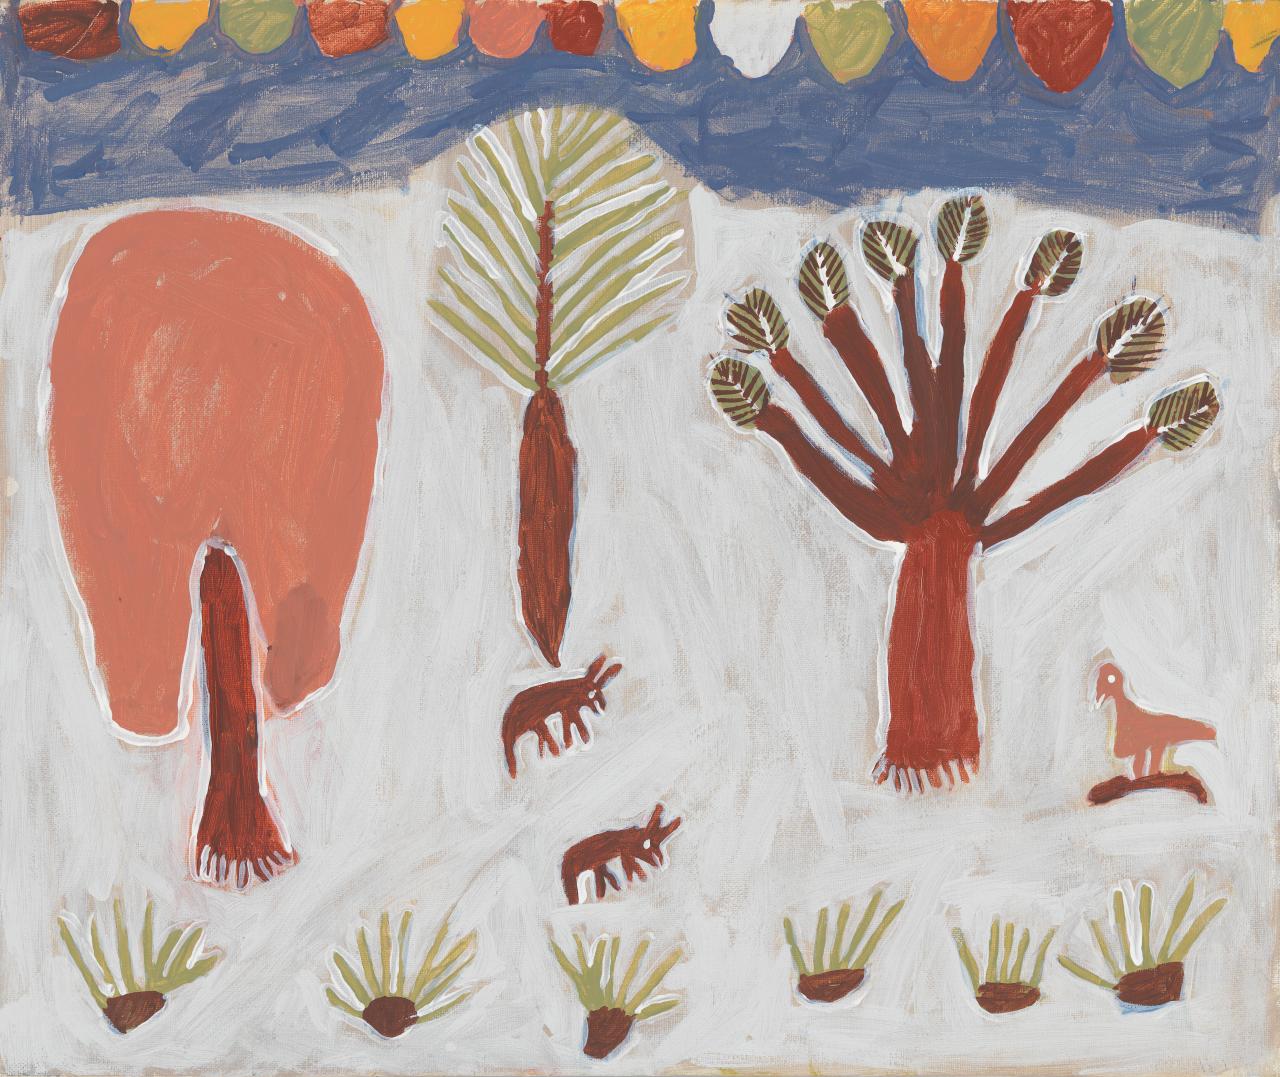  Margaret Rarru,  Dogs,  synthetic polymer paint on canvas, 50.8 × 61.2 cm, 2010. (National Gallery of Victoria) 